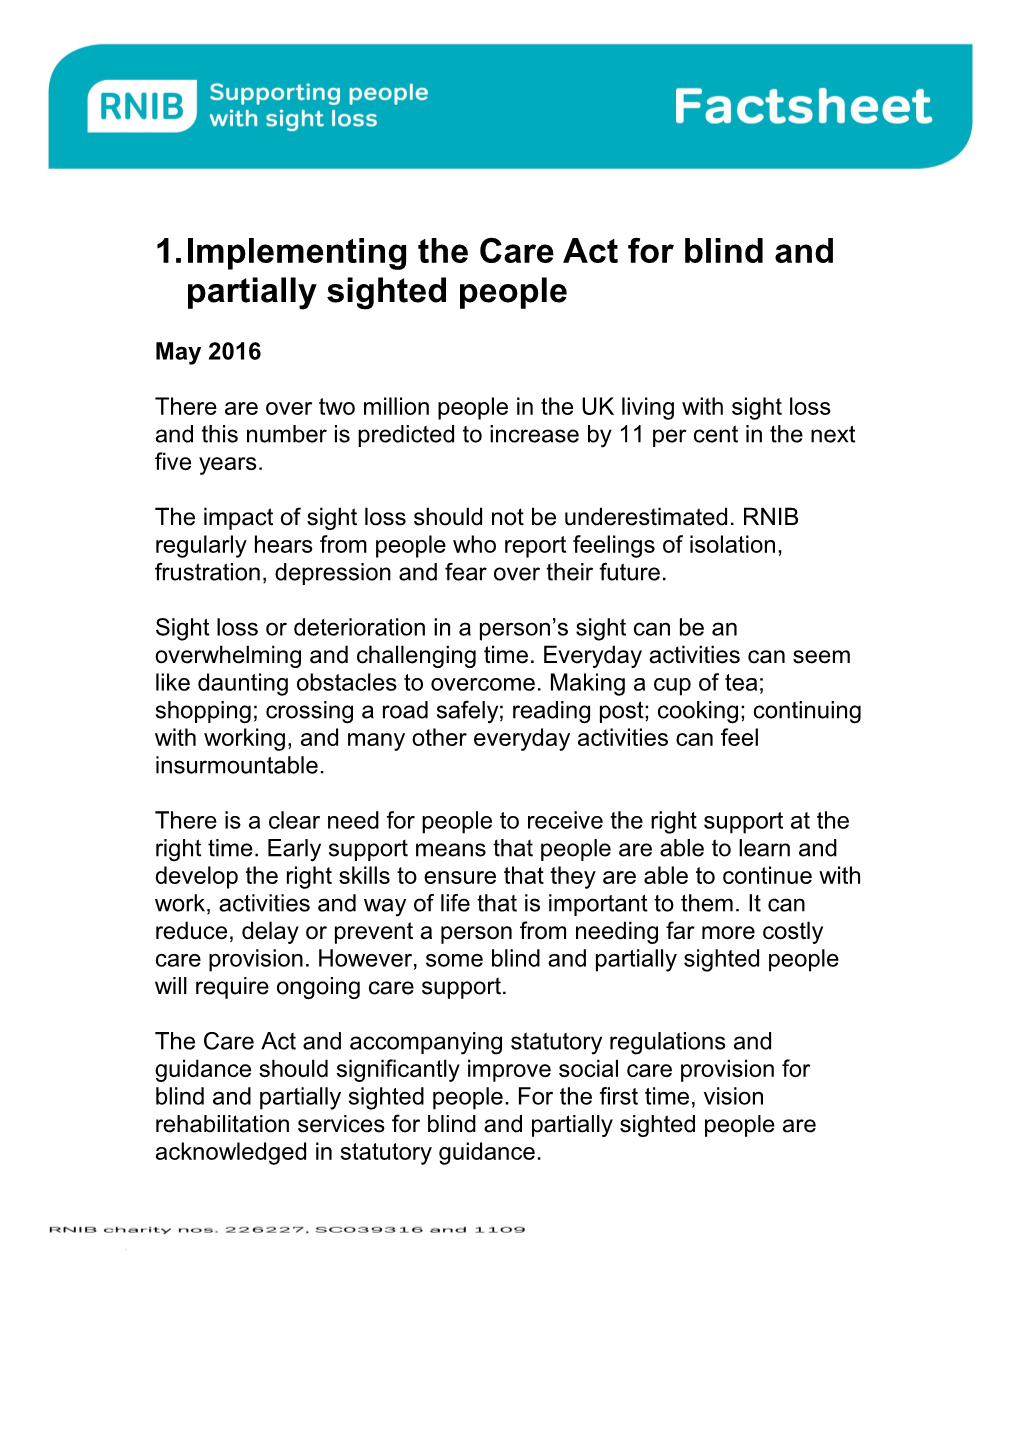 Implementing the Care Act for Blind and Partially Sighted People